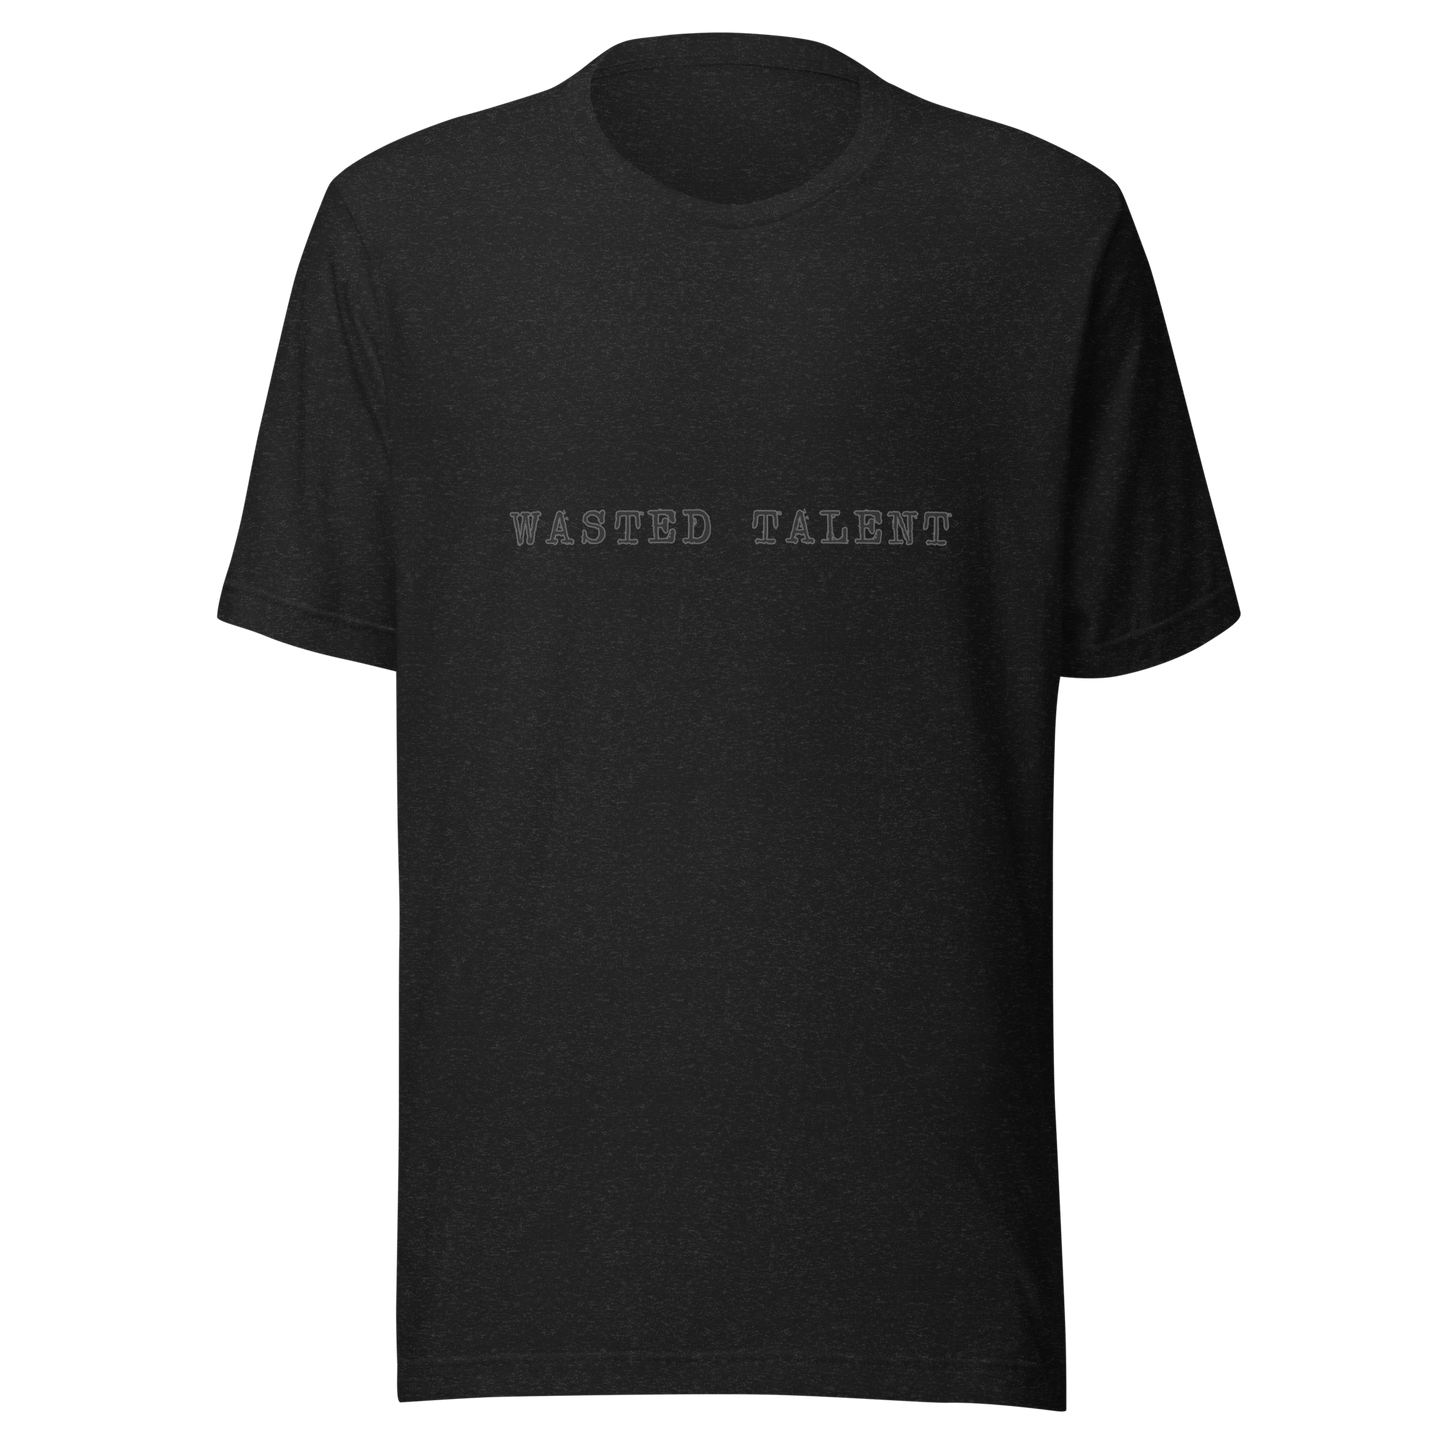 wasted talent t-shirt in black - gaslit apparel